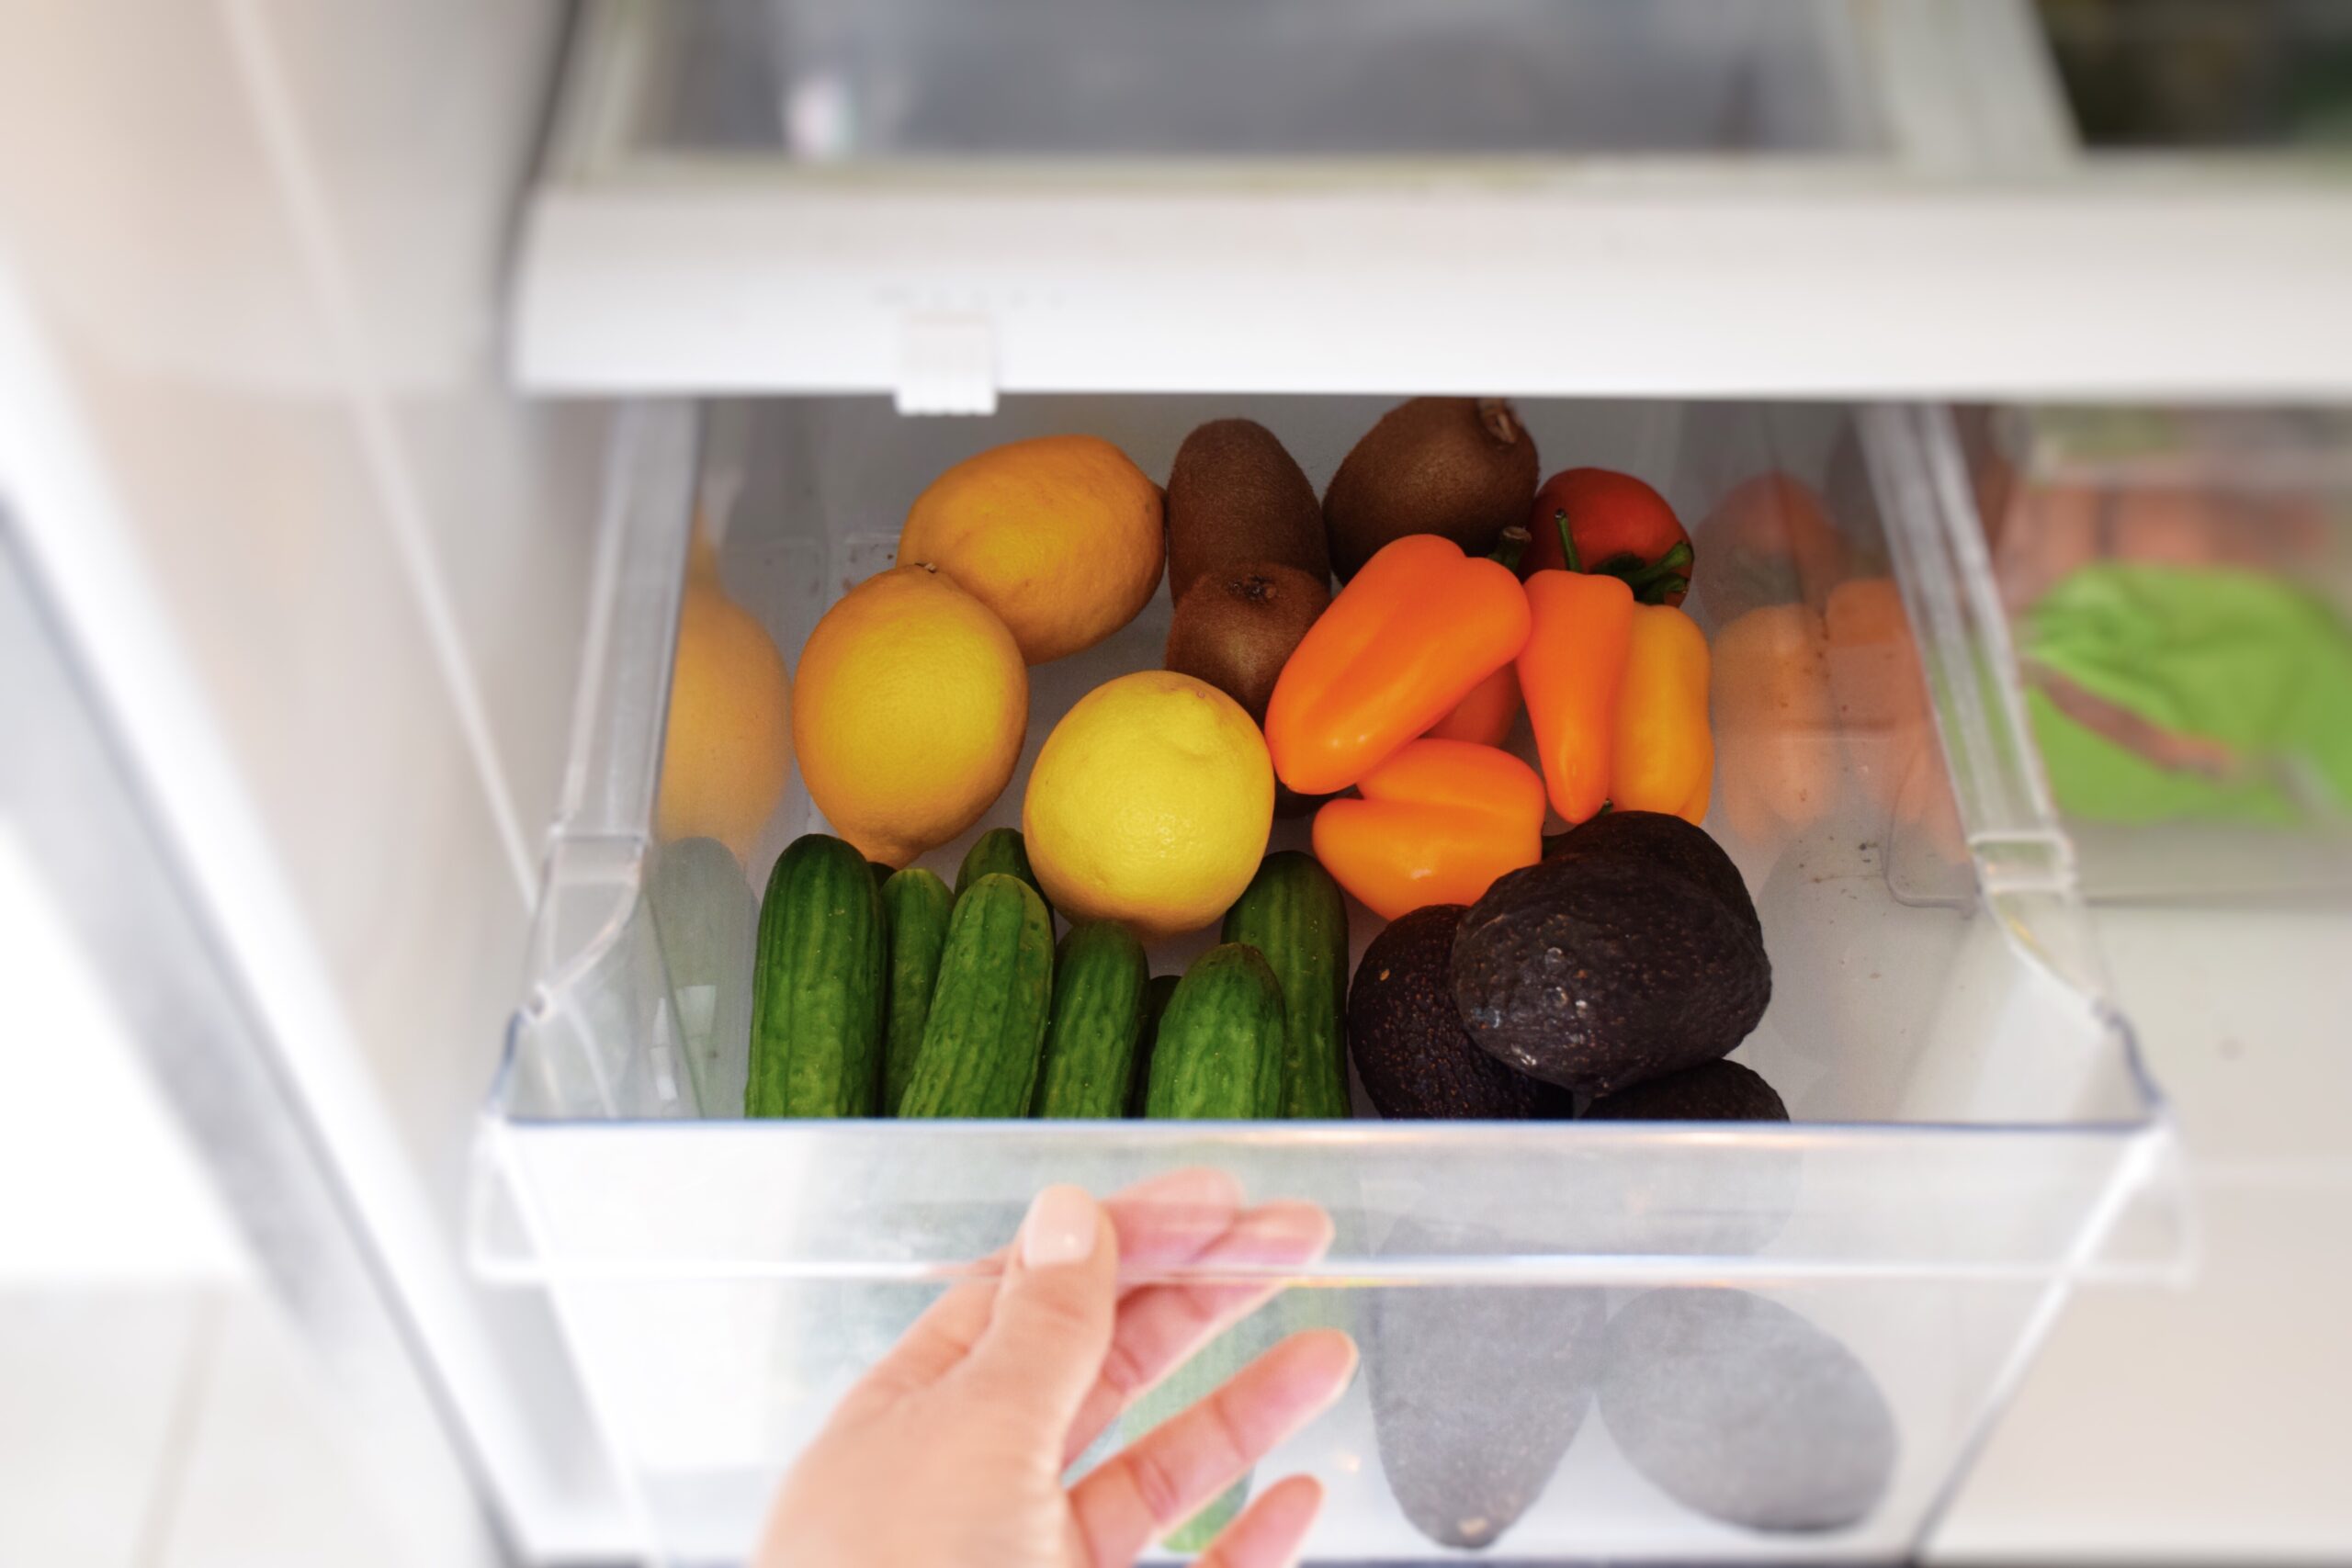 persons hand opening fruit drawer in freezer